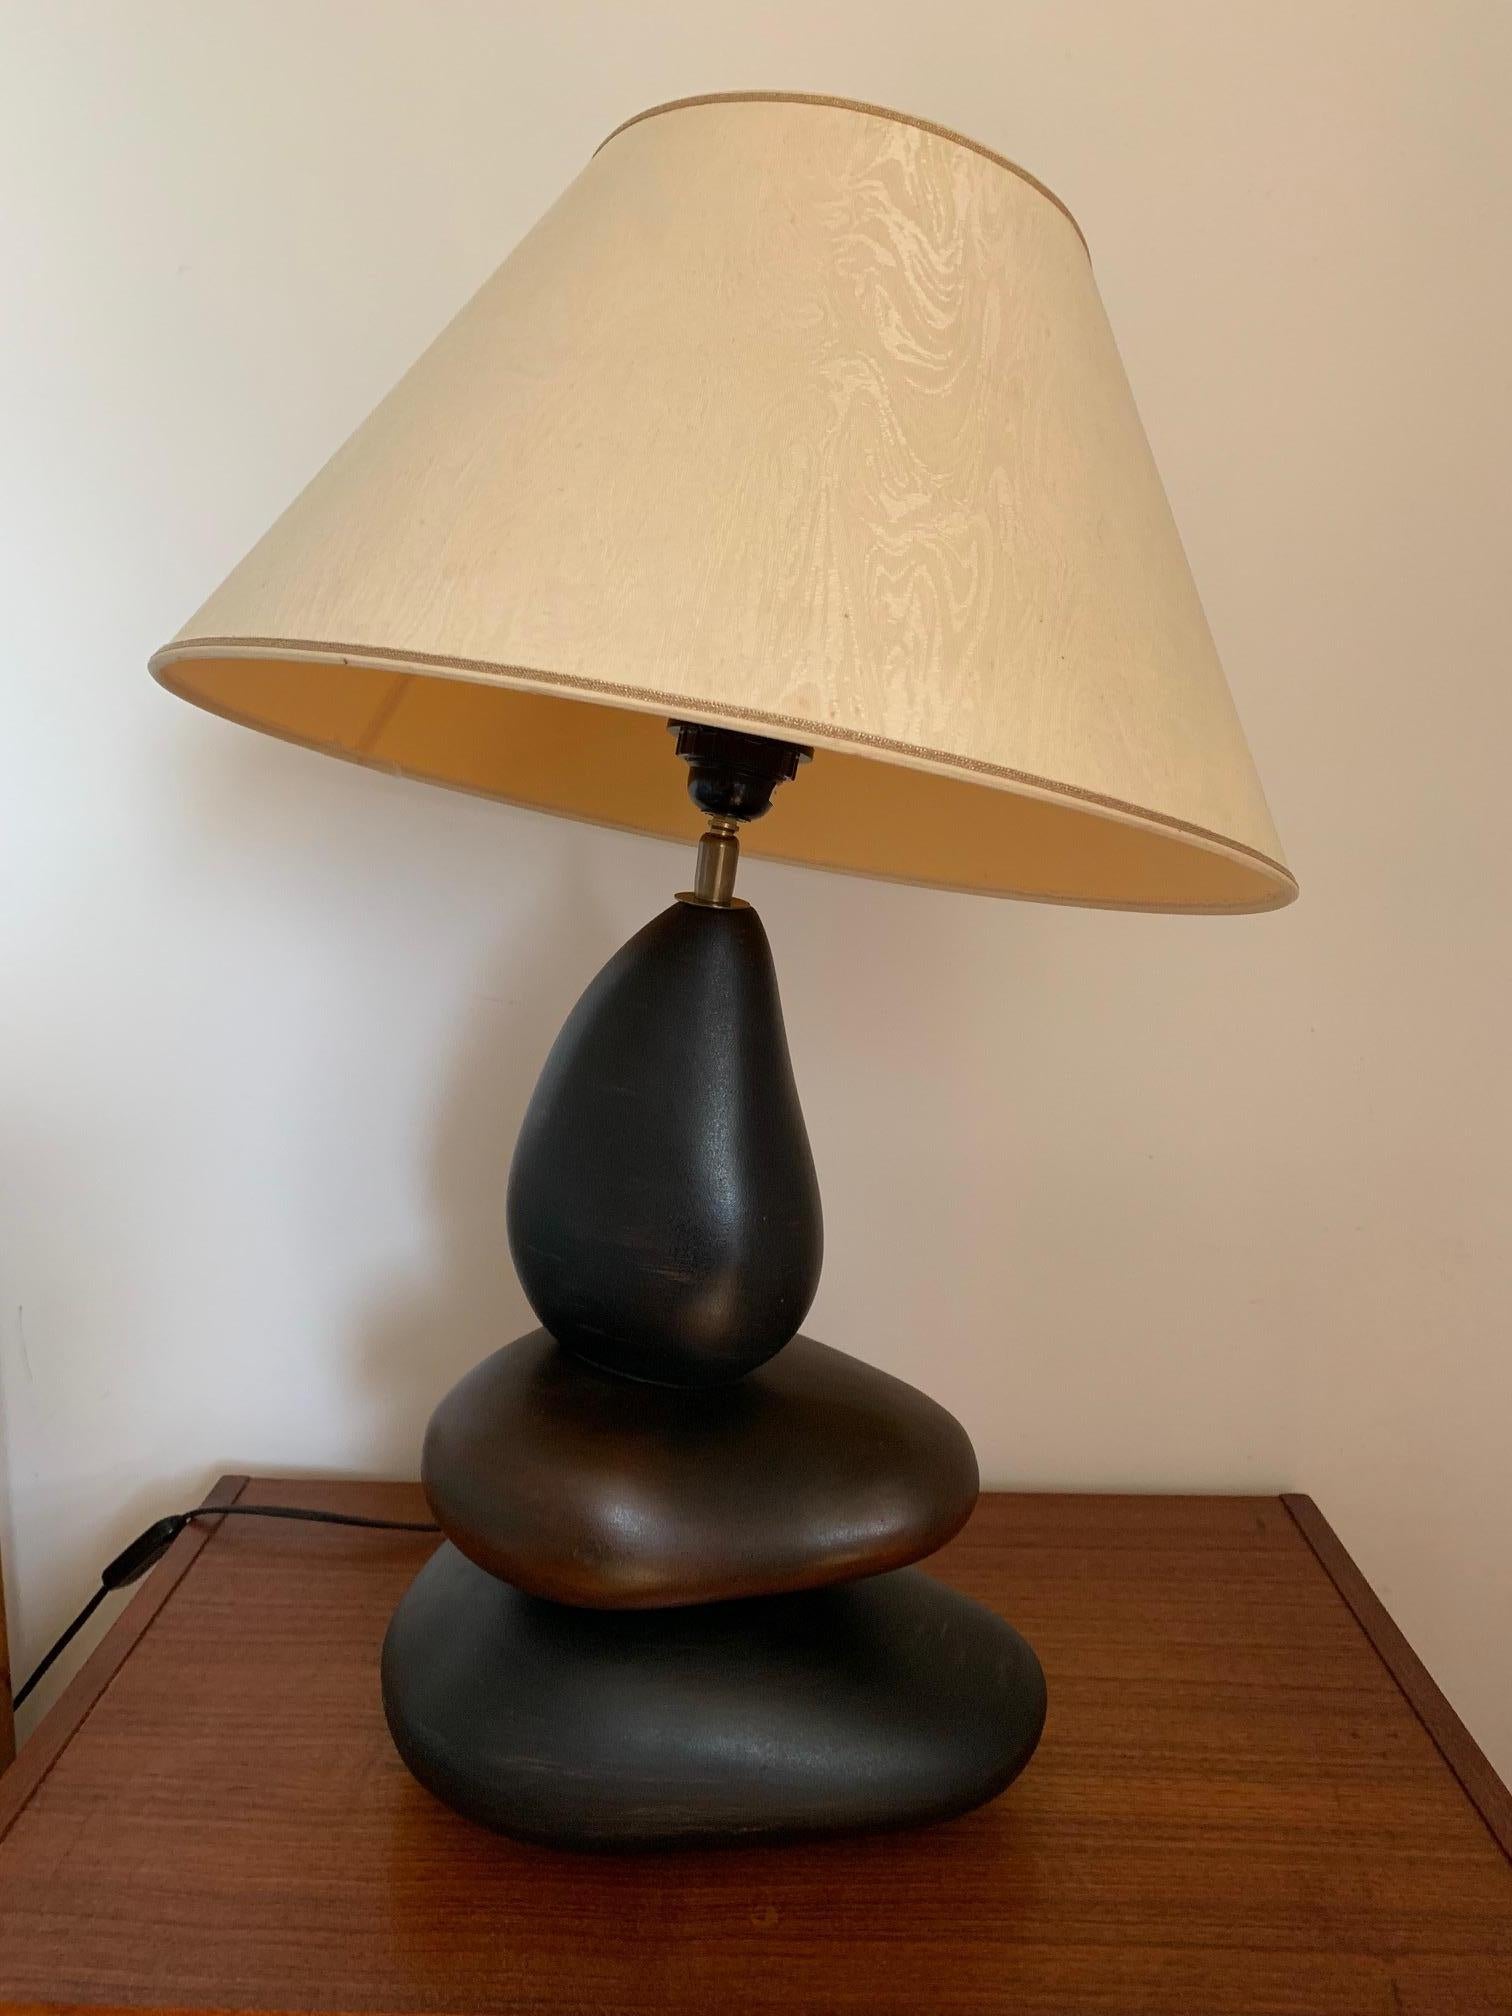 French Lamp designed by François Chatain, France, 1970s